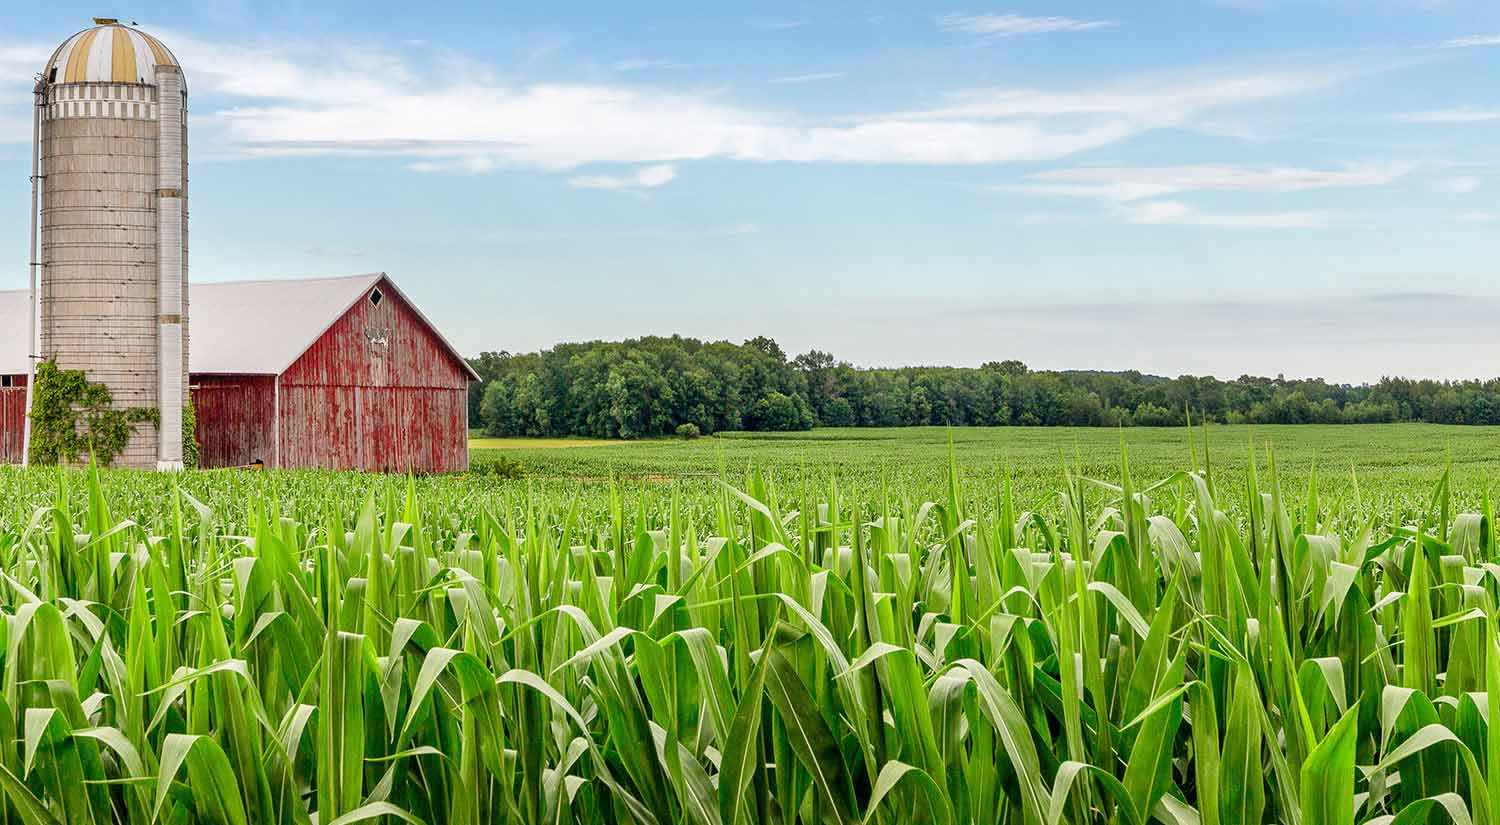 A serene image of a green corn field in summer with a blue sky overhead, and a red barn and grain silo to the left. In the distance, there is a lush green woods.